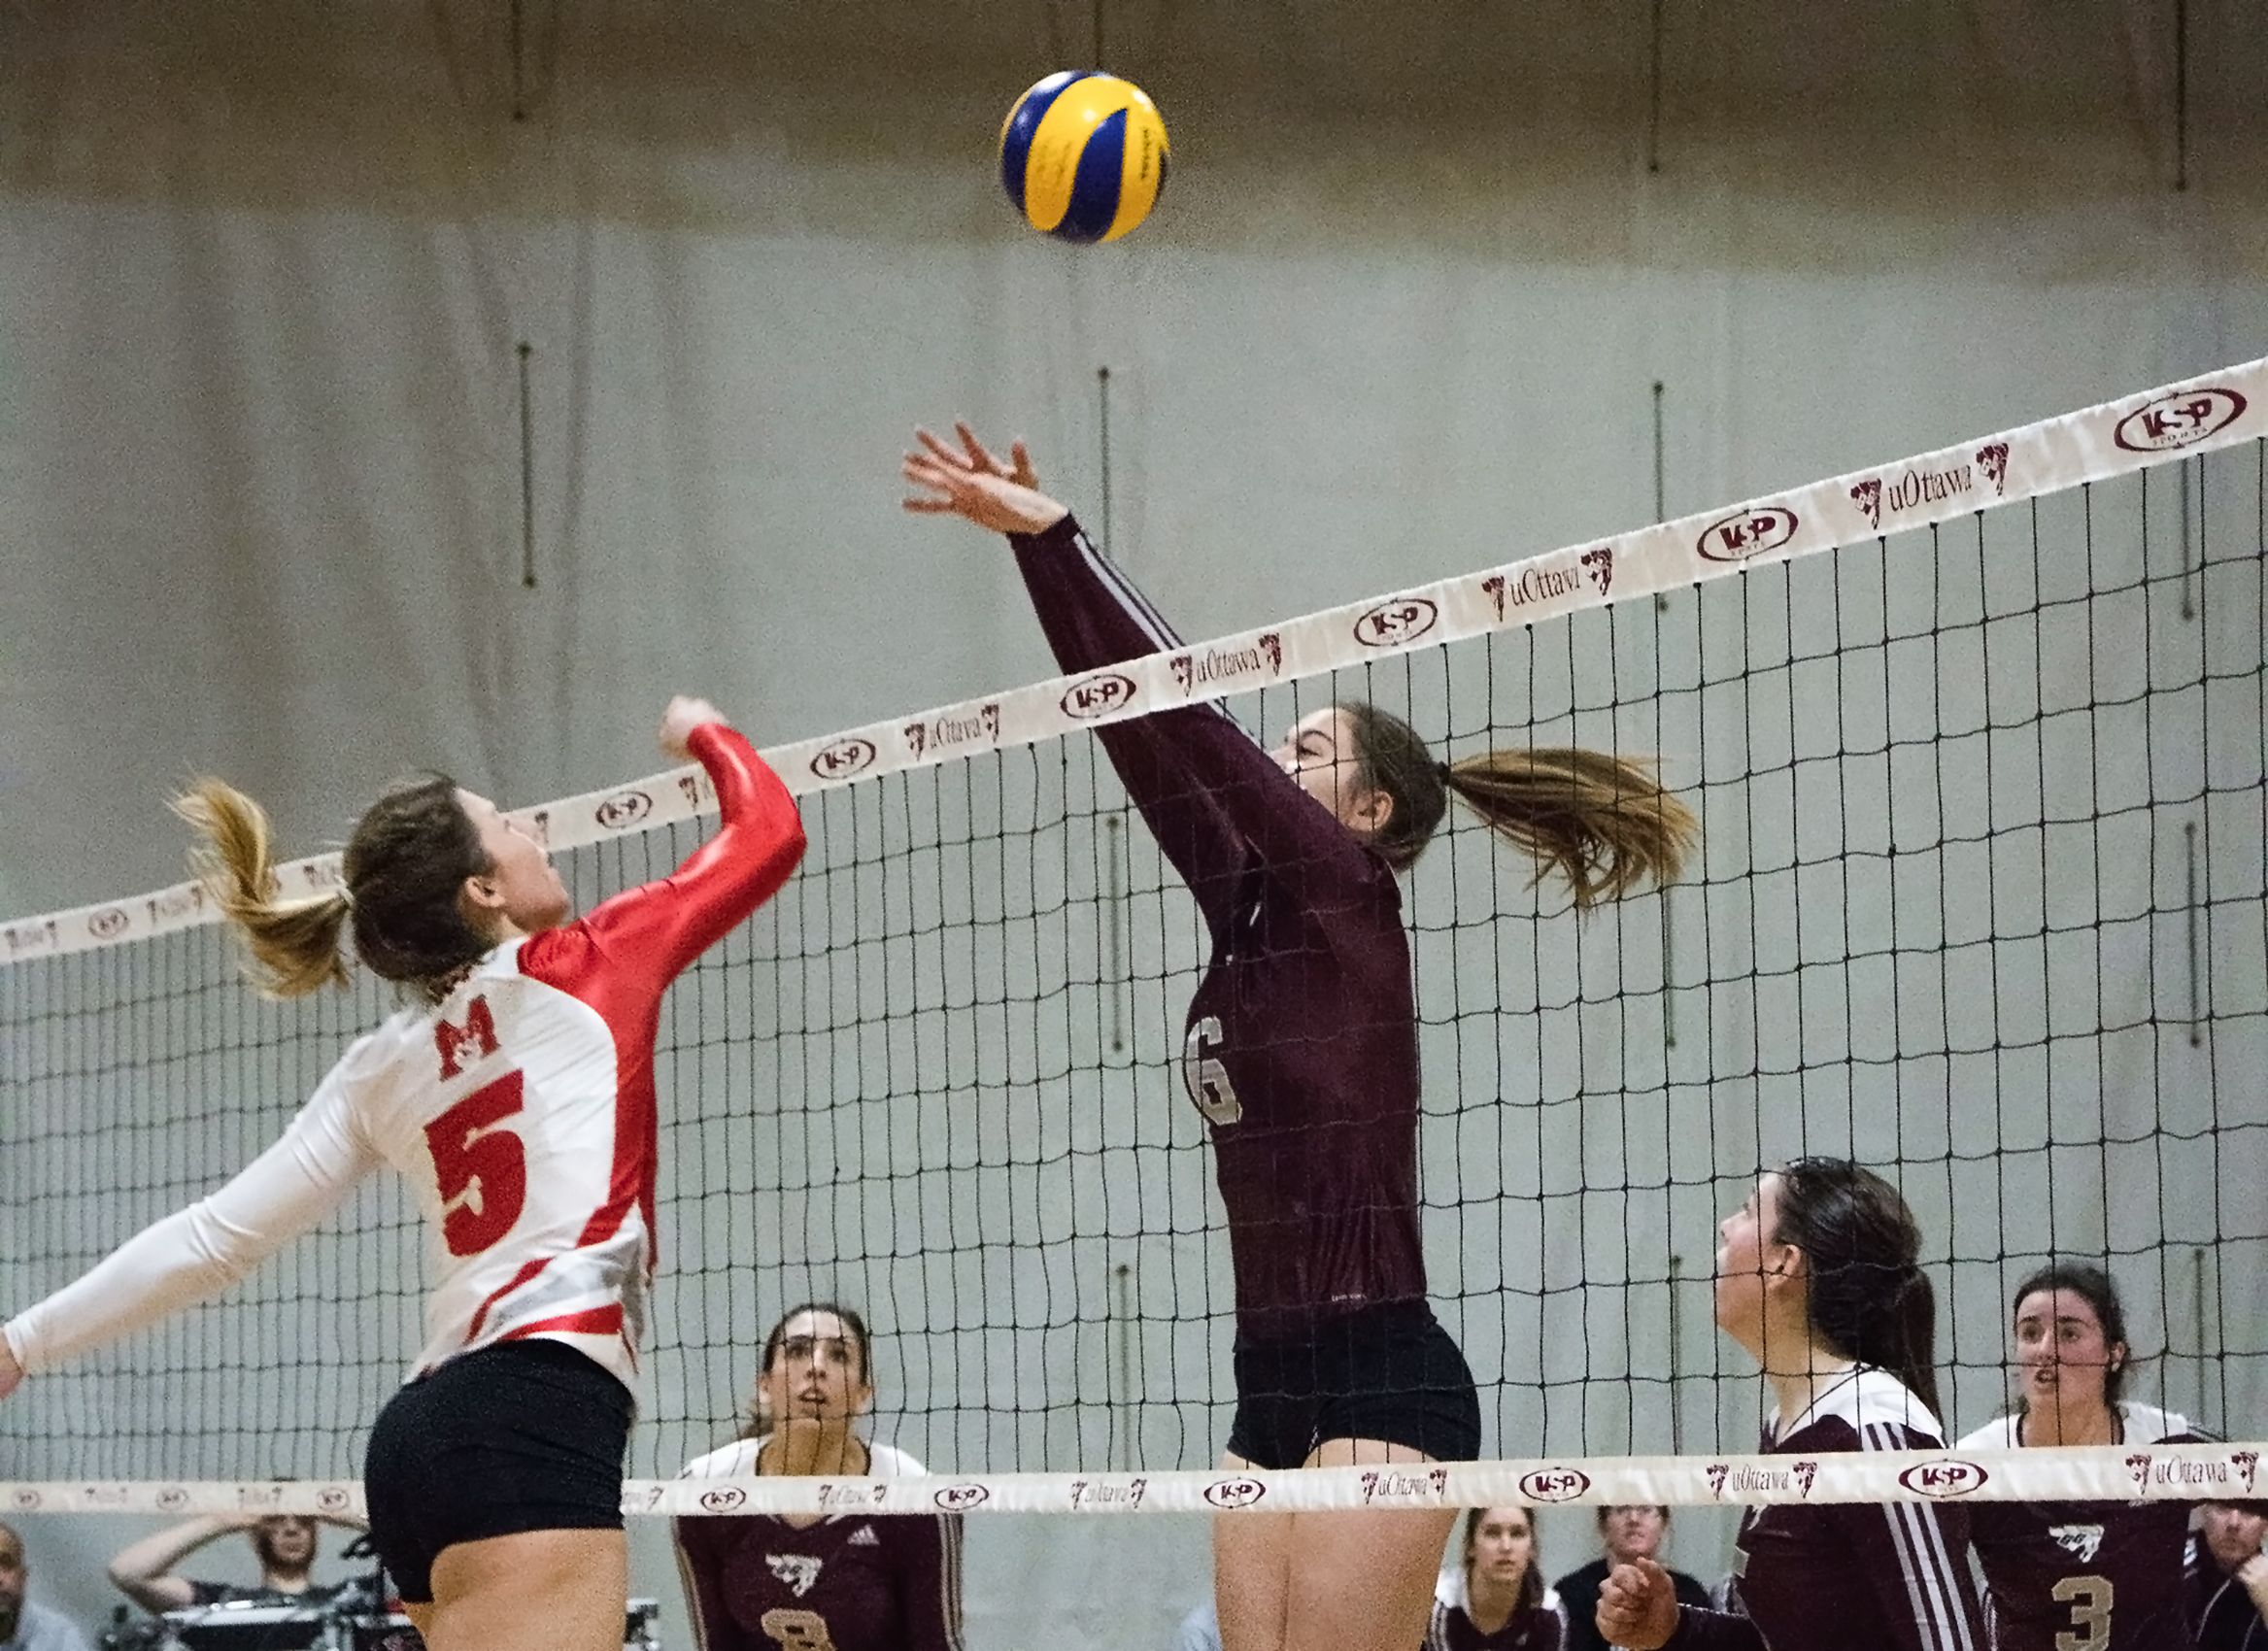 Women's volleyball makes epic comeback against Sherbrooke - The Fulcrum